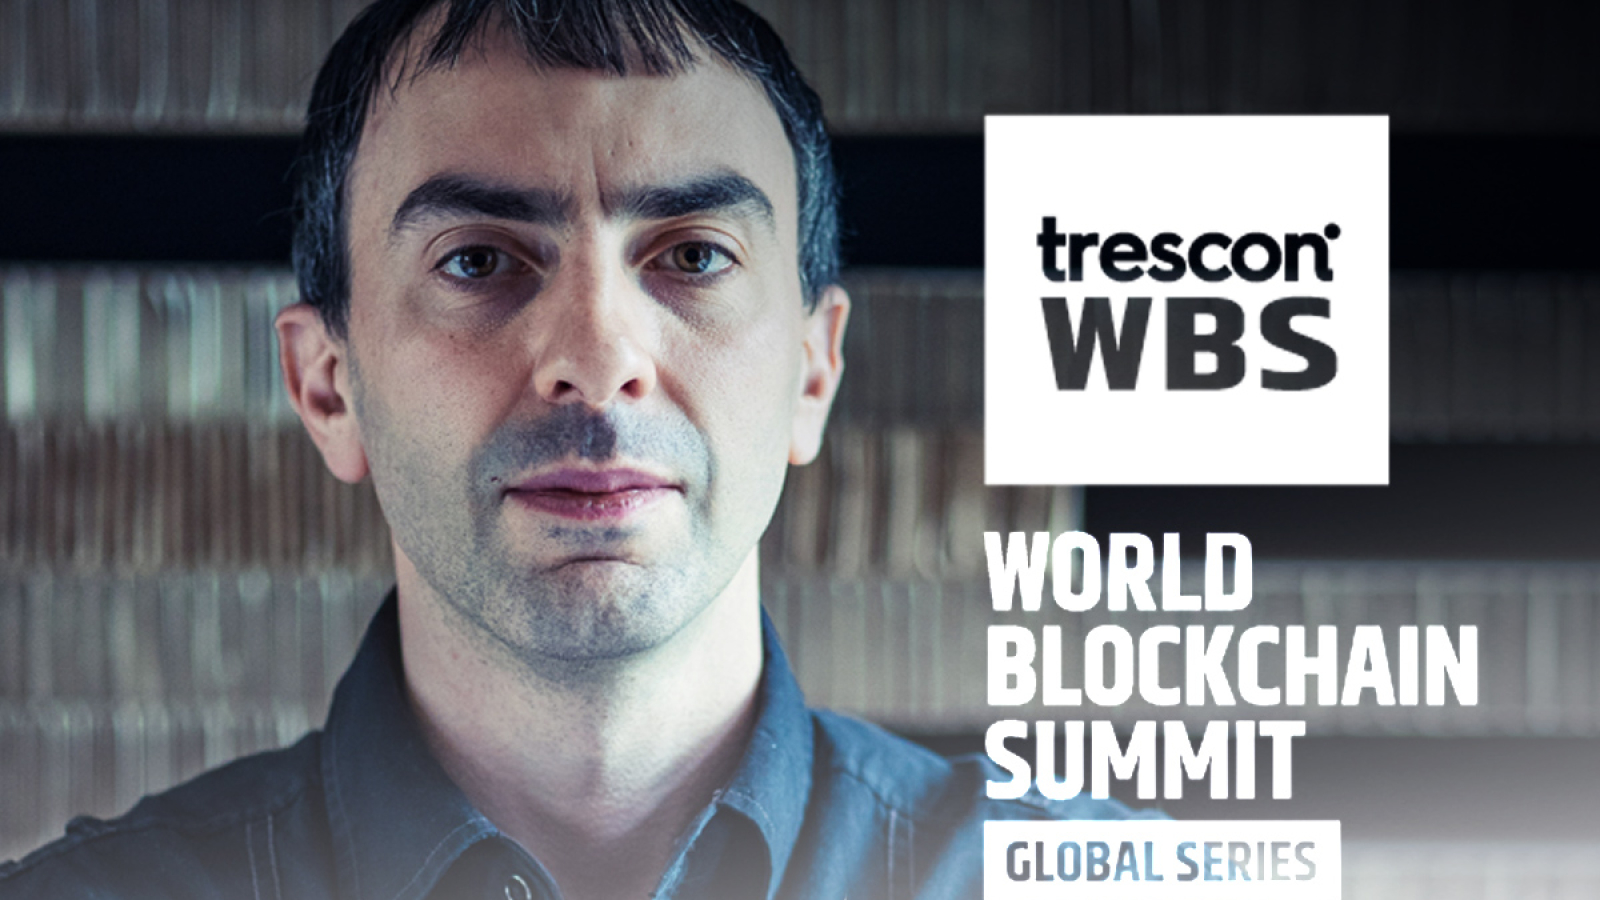 Tone Vays said “Bitcoin has been the fastest technology being adopted in history; faster than the internet and cell phones,” at the 18 th global edition of World Blockchain Summit, hosted by Trescon